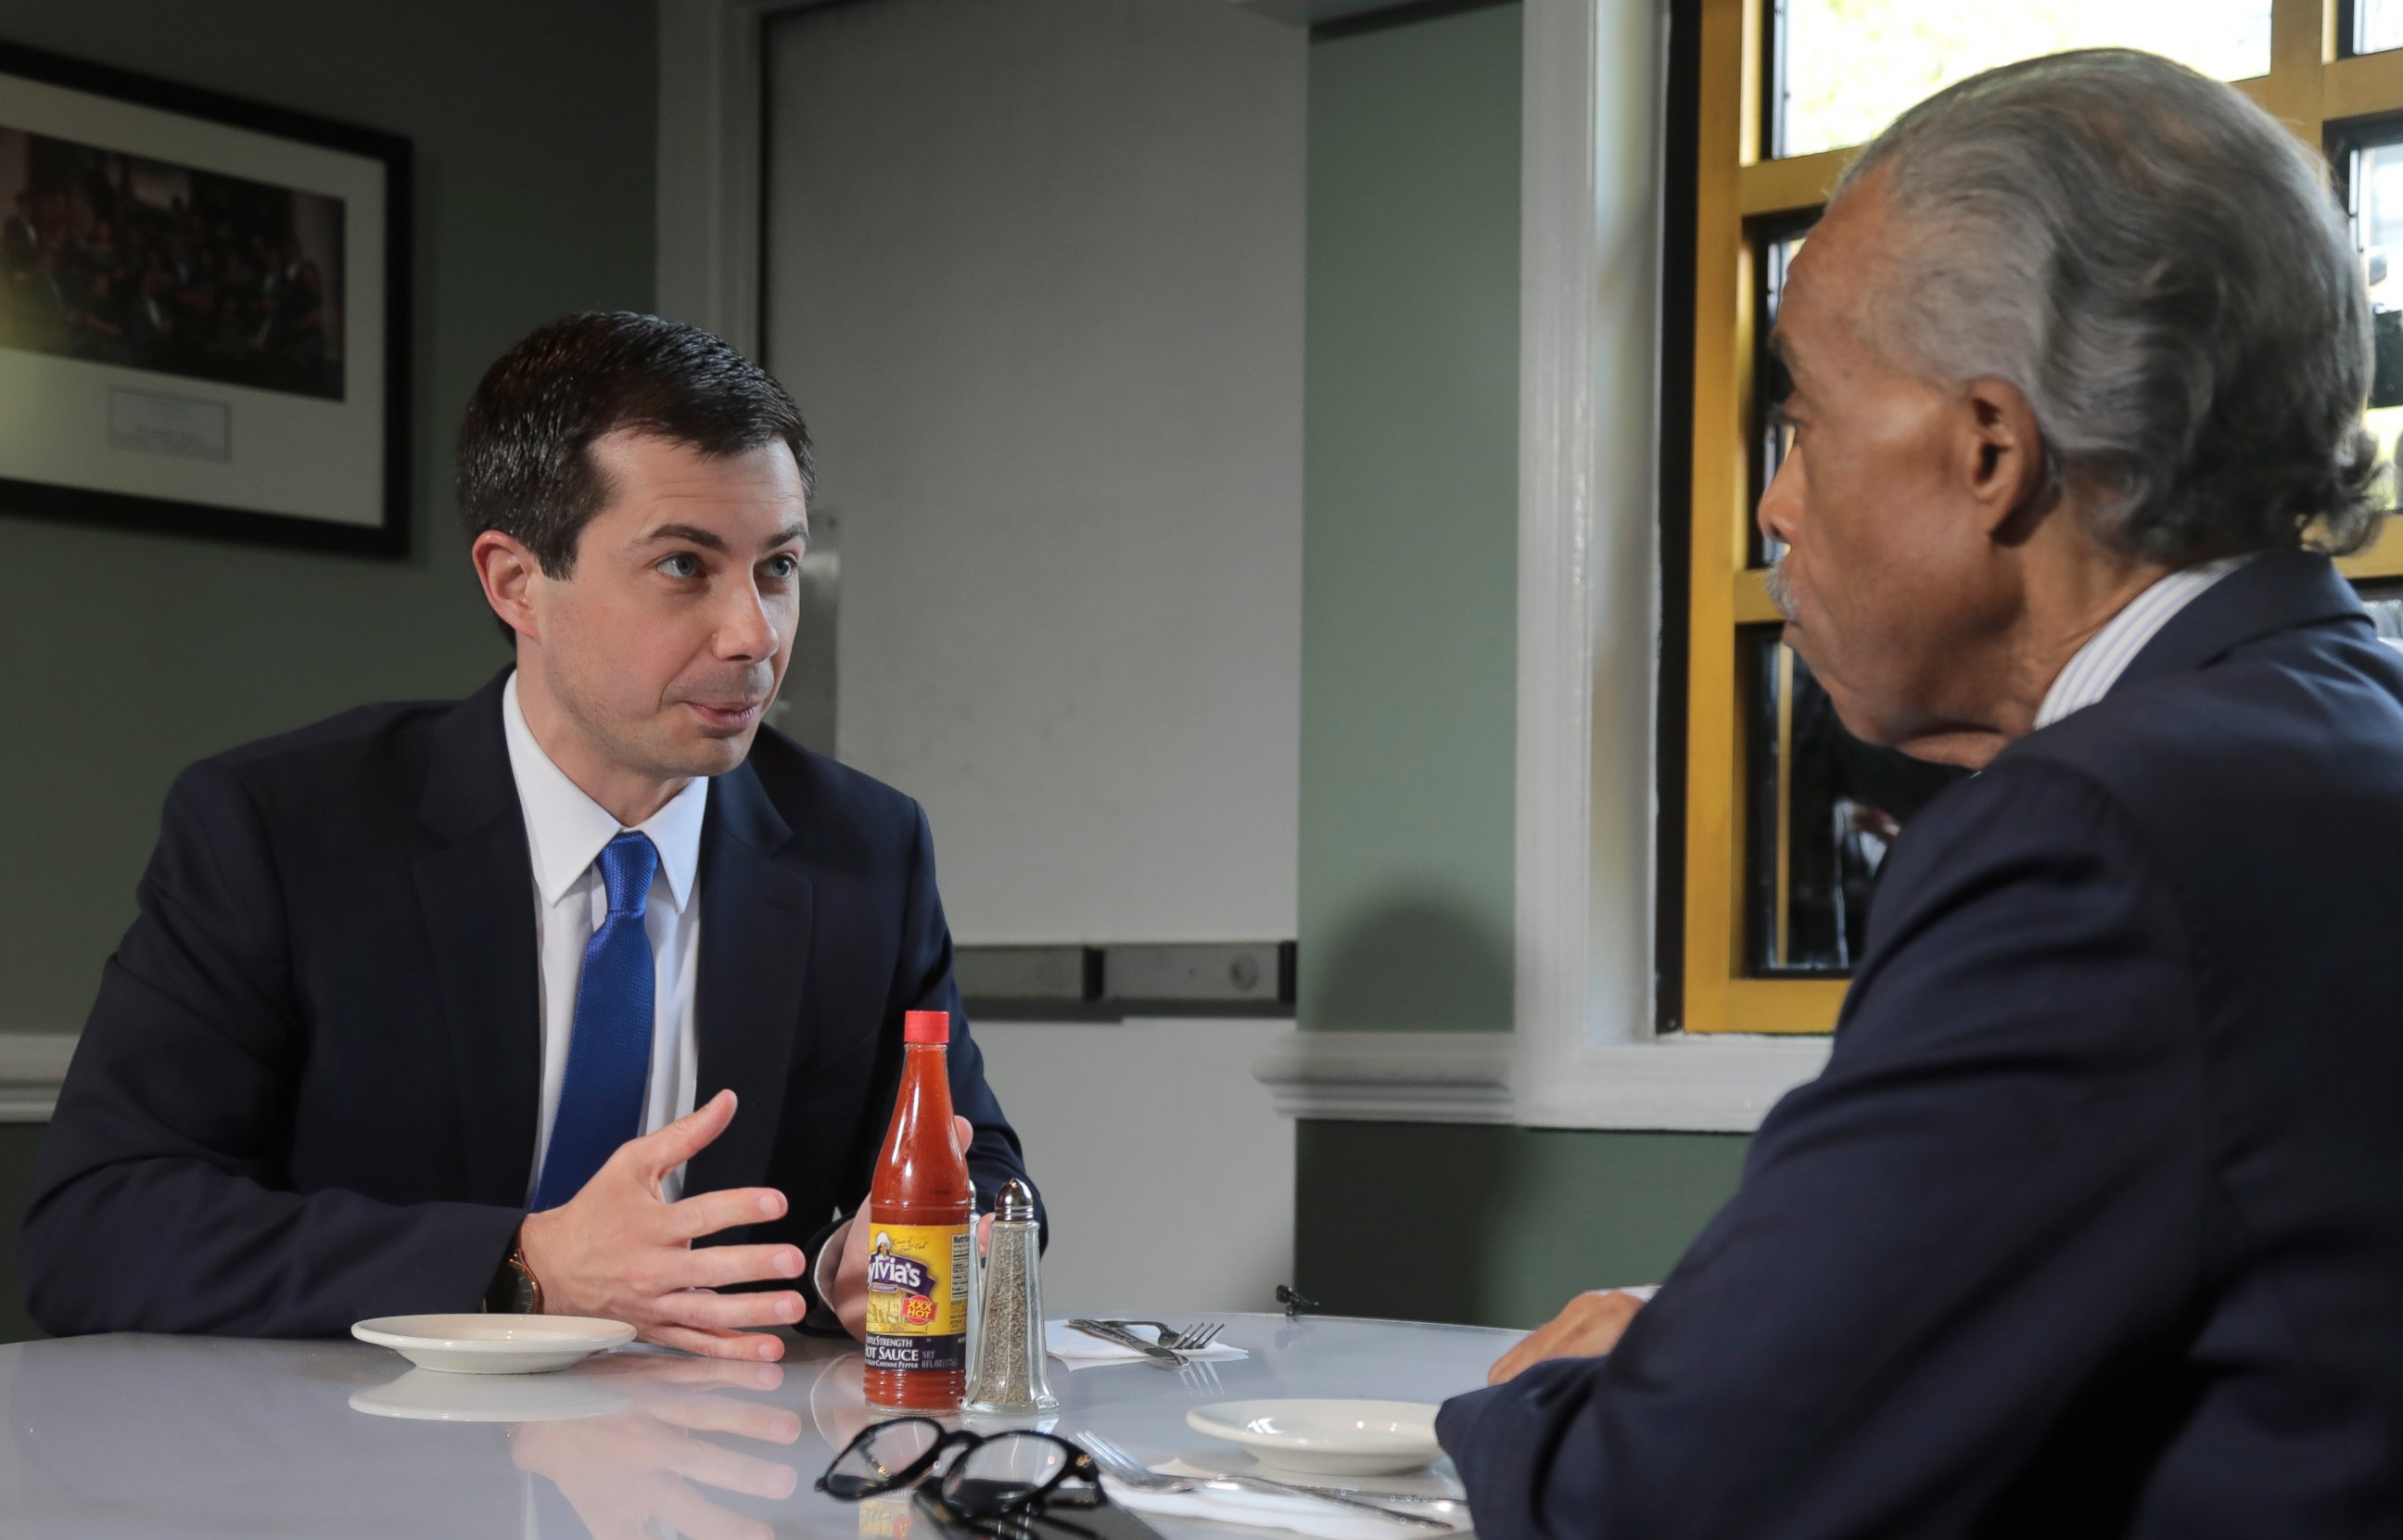 PHOTO: Democratic presidential candidate Mayor Pete Buttigieg, from South Bend, Indiana, and civil rights leader Rev. Al Sharpton, right, hold a lunch meeting at Sylvia's Restaurant in Harlem, New York, Monday, April 29, 2019.